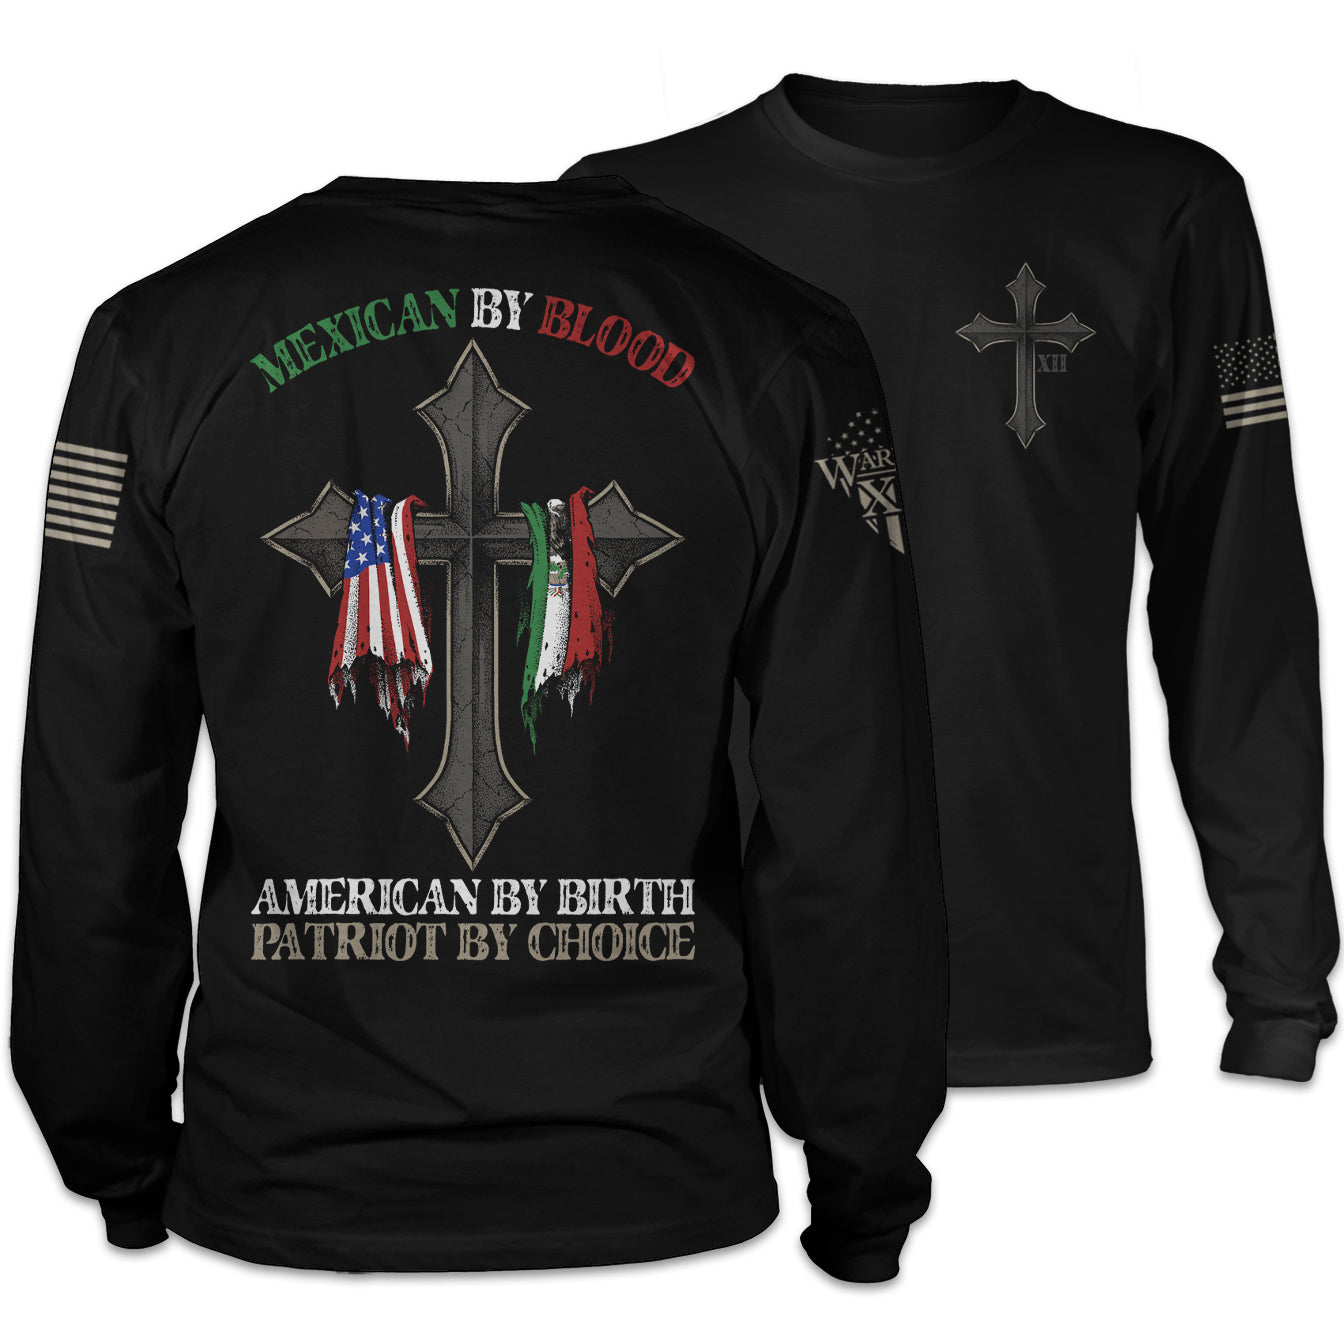 Front & back black long sleeve shirt with the words "Mexican by blood, American by birth, patriot by choice" with a cross holding the American and Mexican flag printed on the shirt.